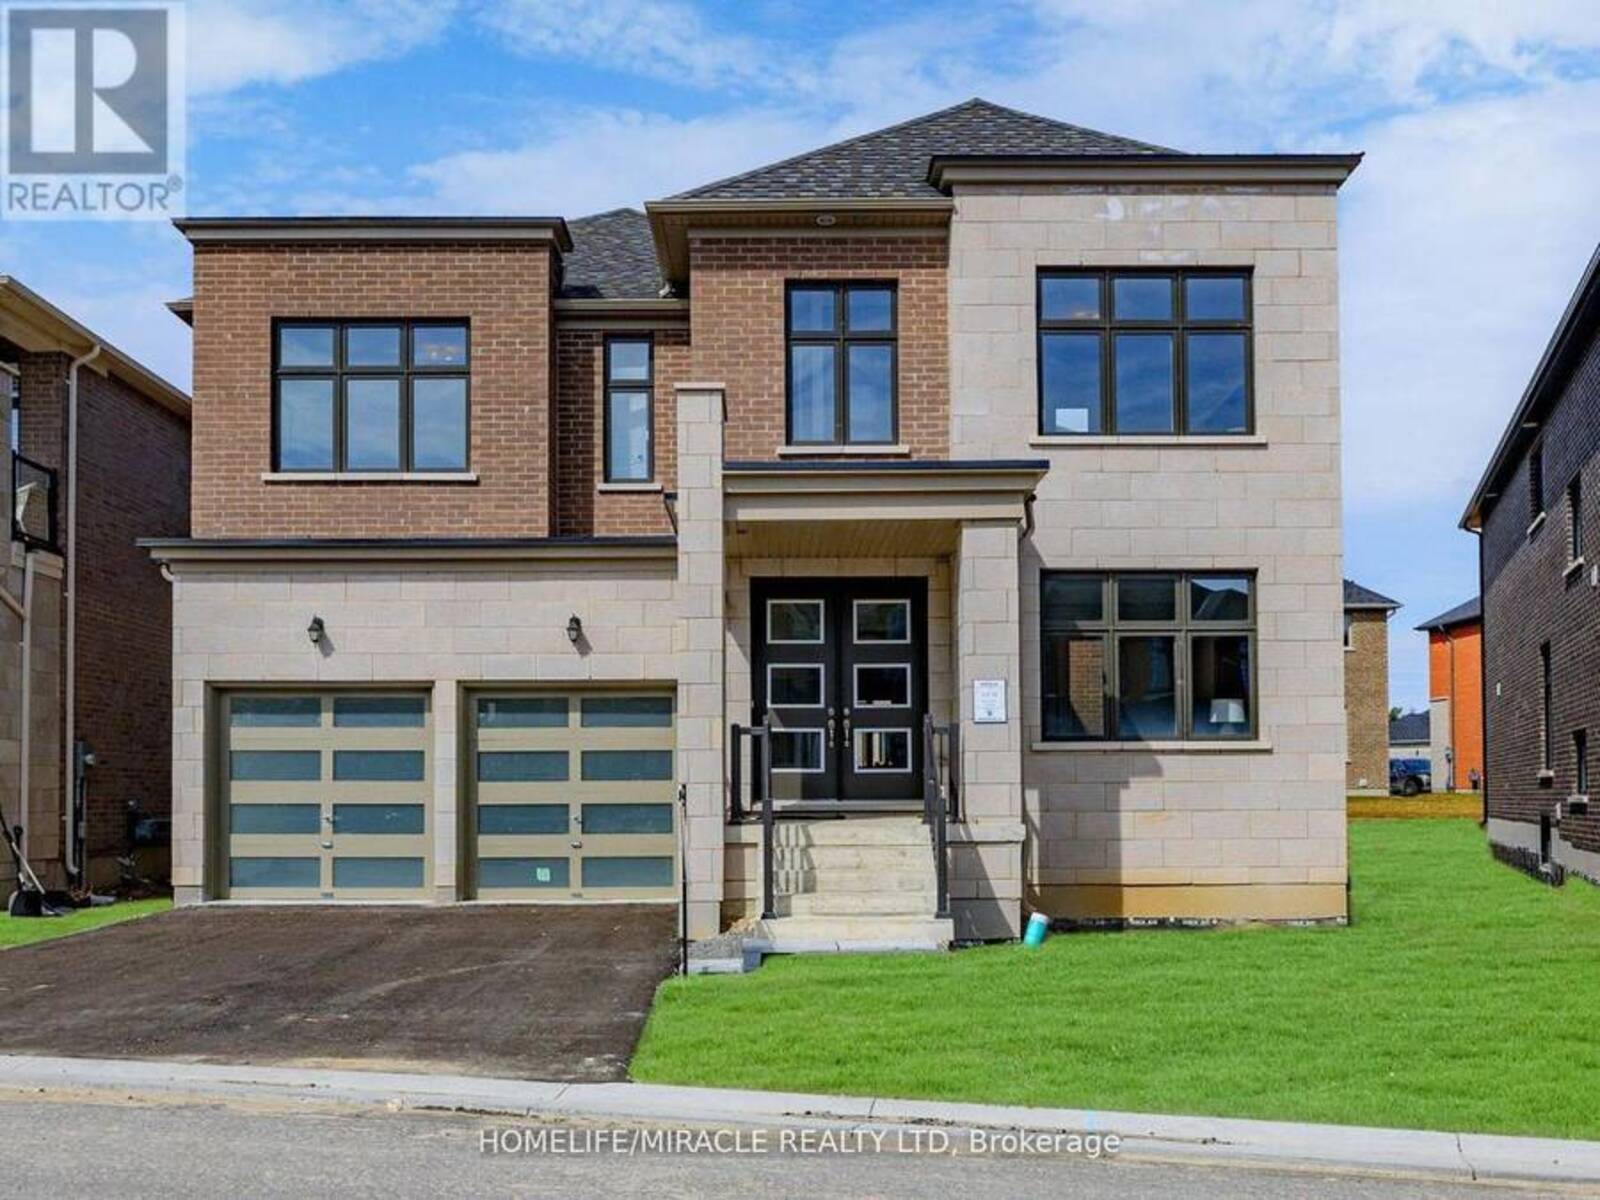 25 JOINER CIRCLE, Whitchurch-Stouffville, Ontario L4A 4W9